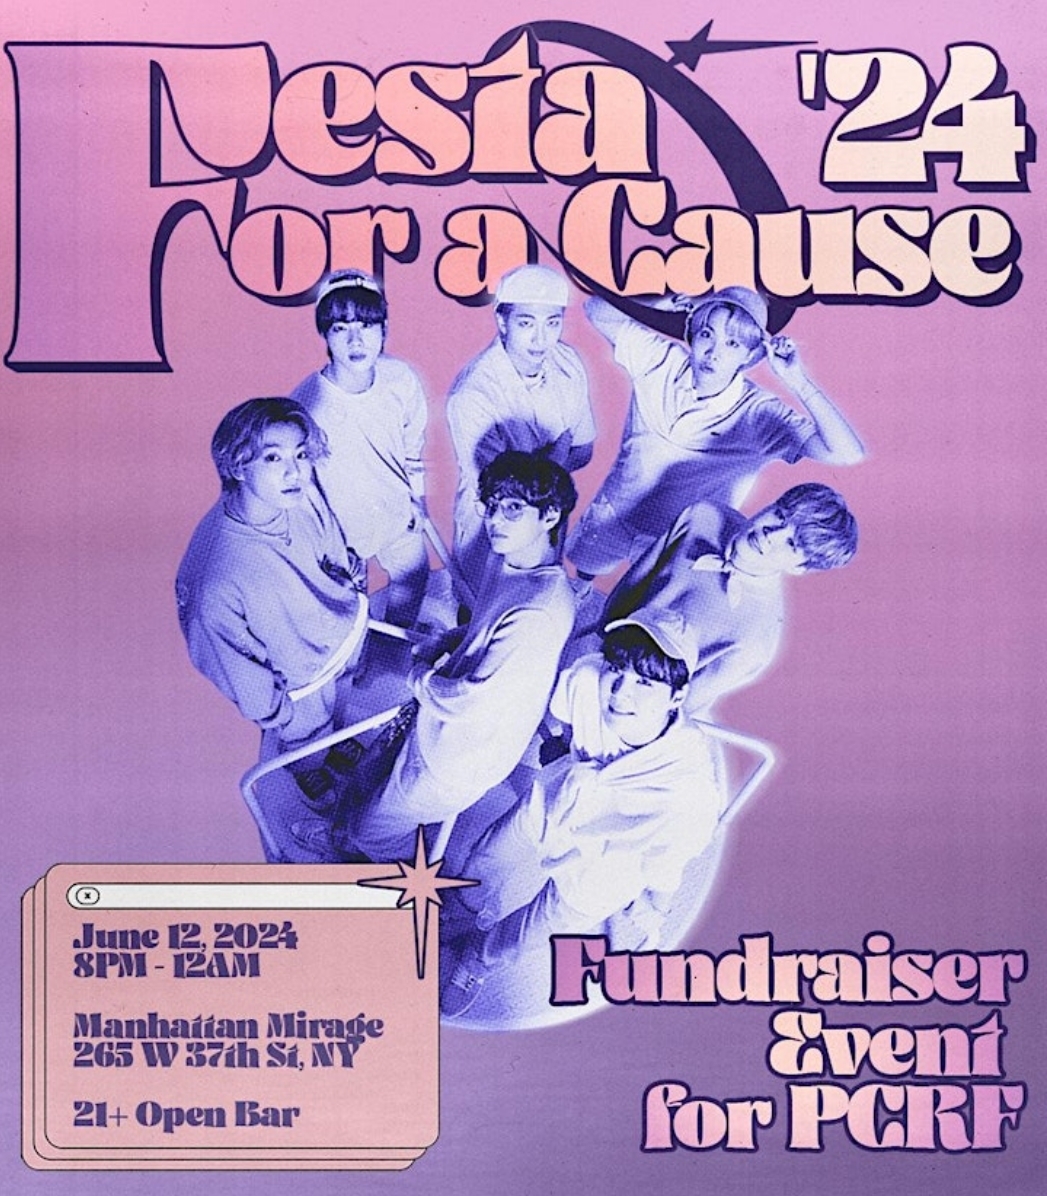 Festa For A Cause